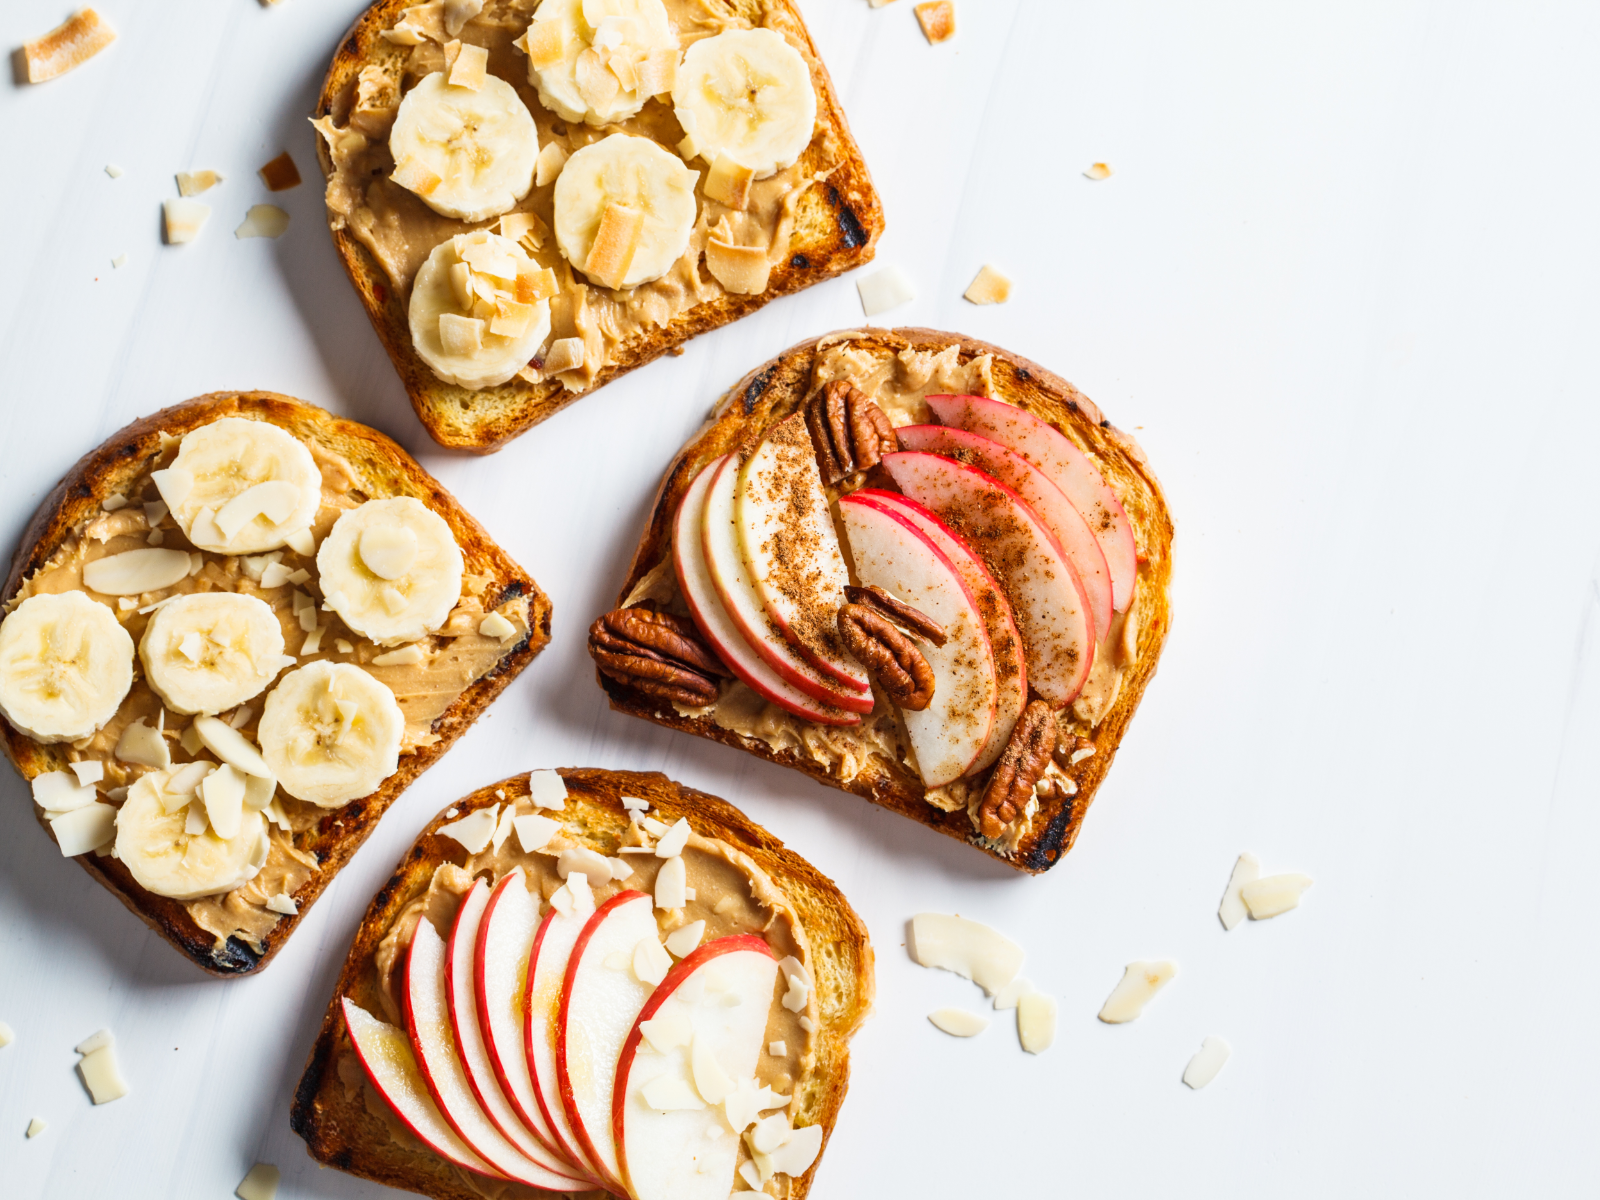 peanut butter toast with fruit on top